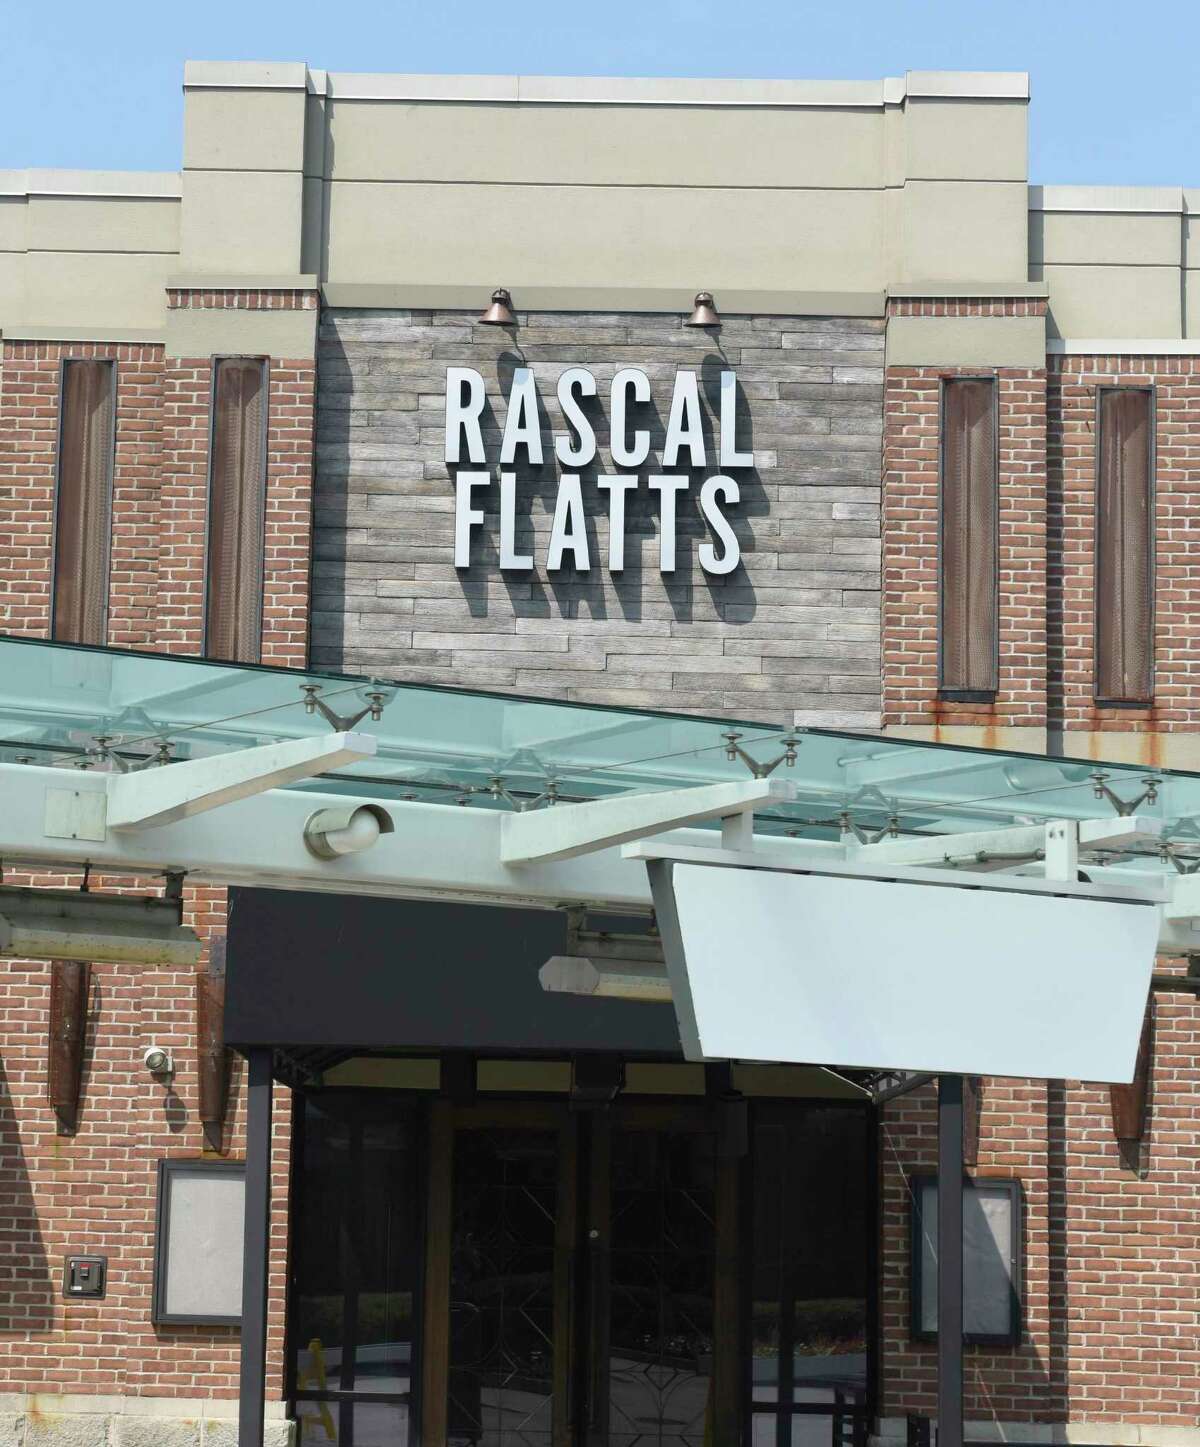 Mexican restaurant Puerto Vallarta is expected to open in the spring of 2022 in a space occupied from 2017 to 2018 by a Rascal Flatts restaurant in the restaurant plaza at 230 Tresser Blvd., at Stamford Town Center in Stamford, Conn.